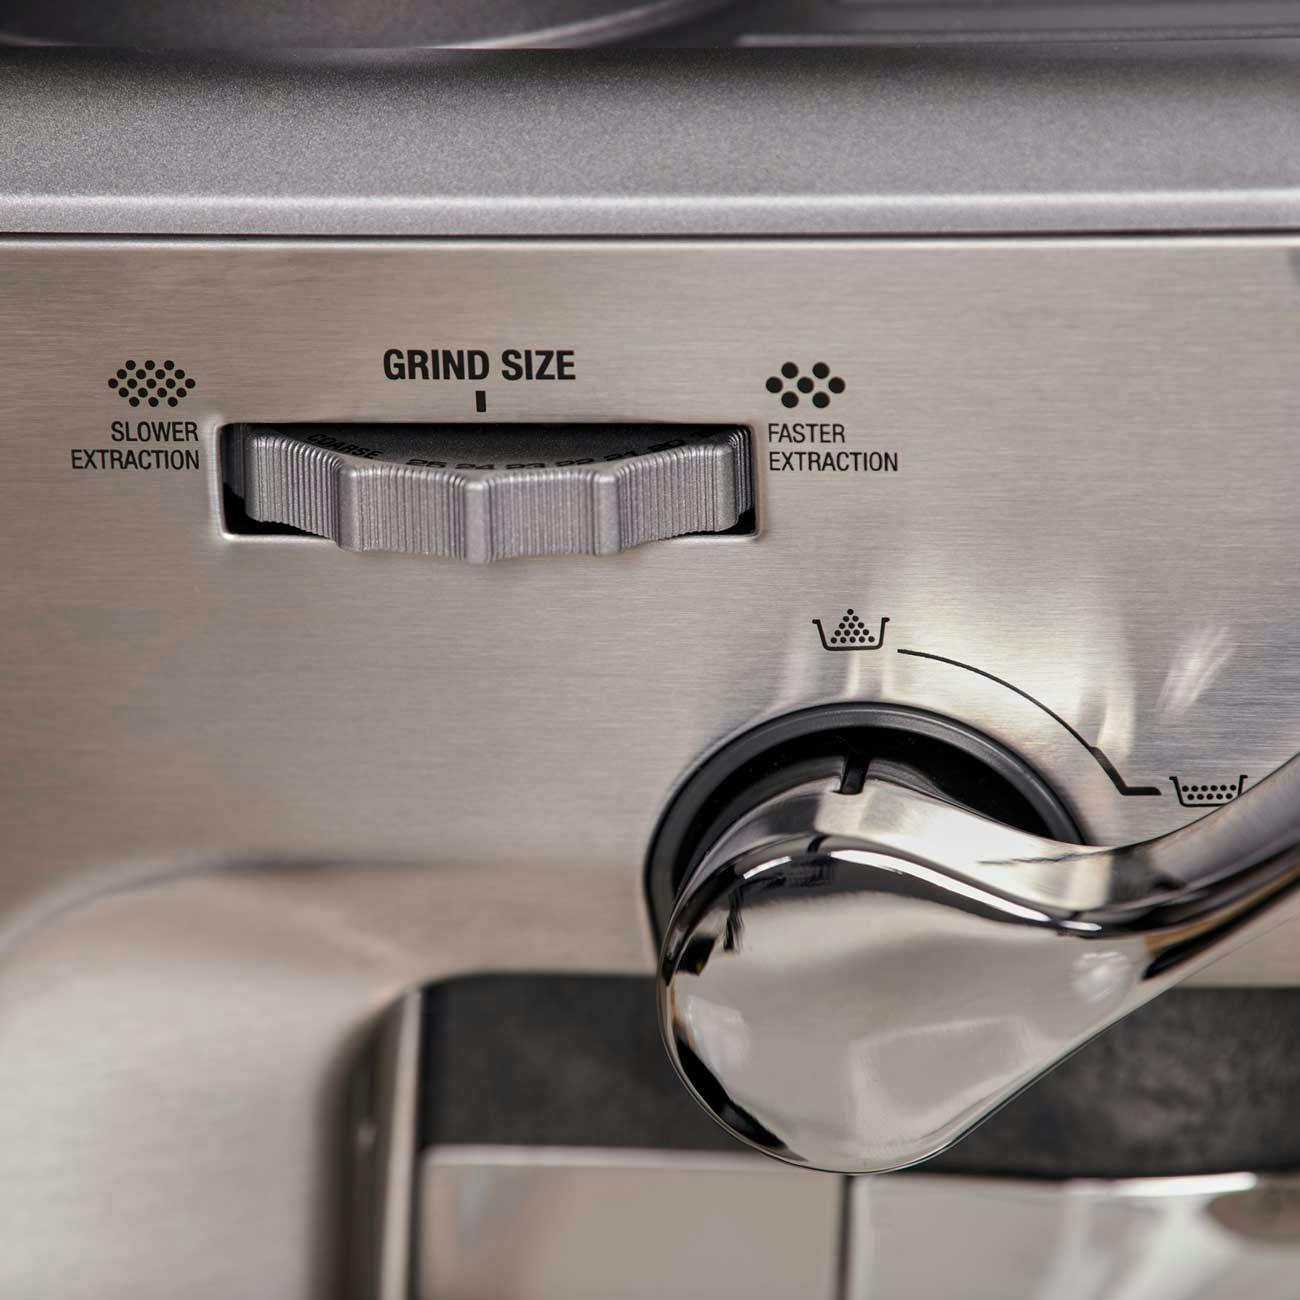 Breville Barista Express Impress Brushed Stainless Steel Espresso Machine +  Reviews